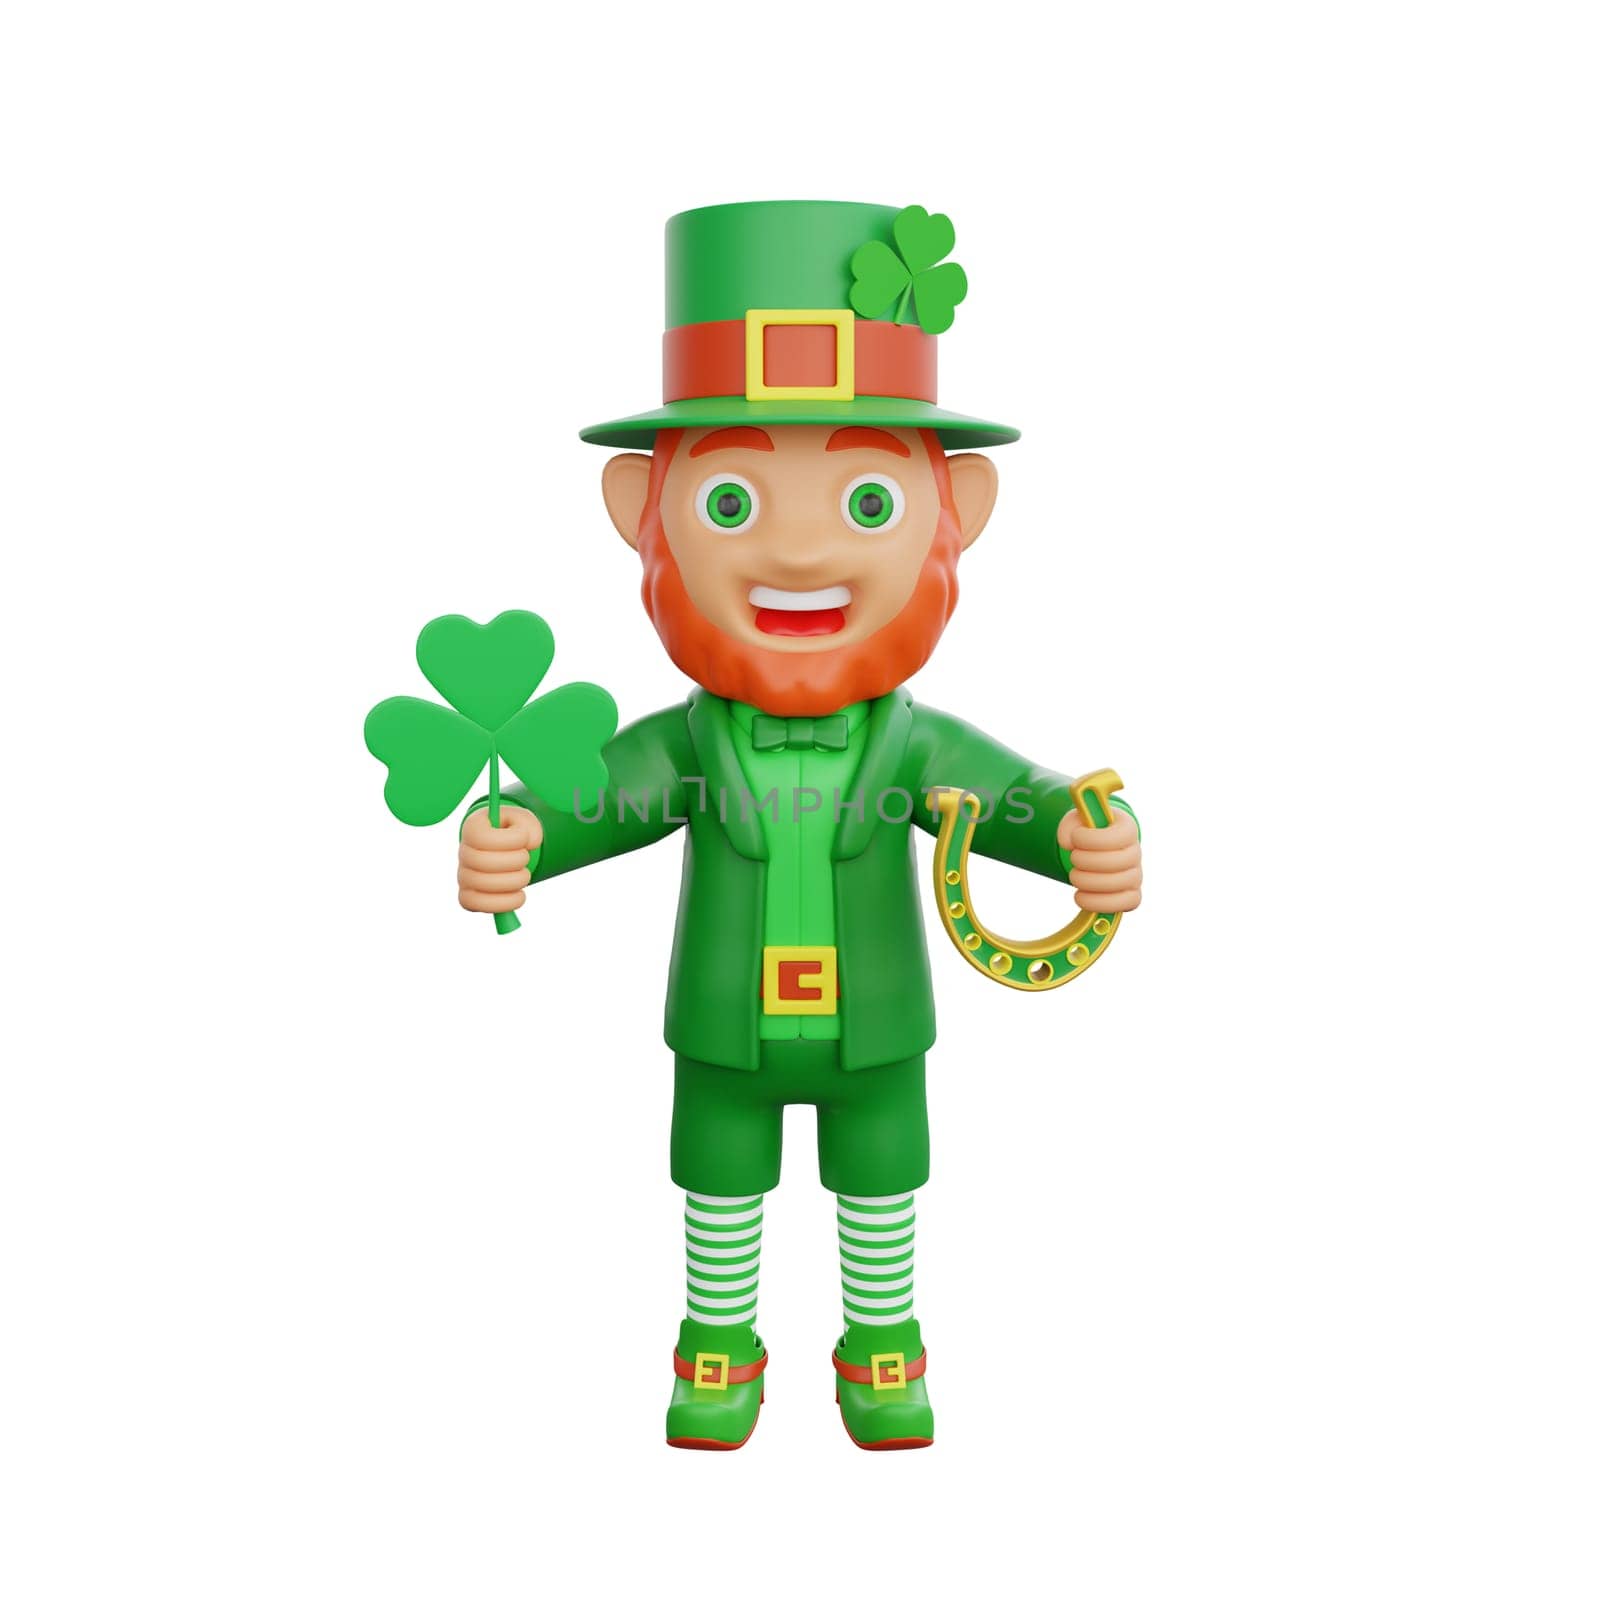 3D illustration of St. Patrick's Day character leprechaun holding a lucky clover and a golden horseshoe by Rahmat_Djayusman